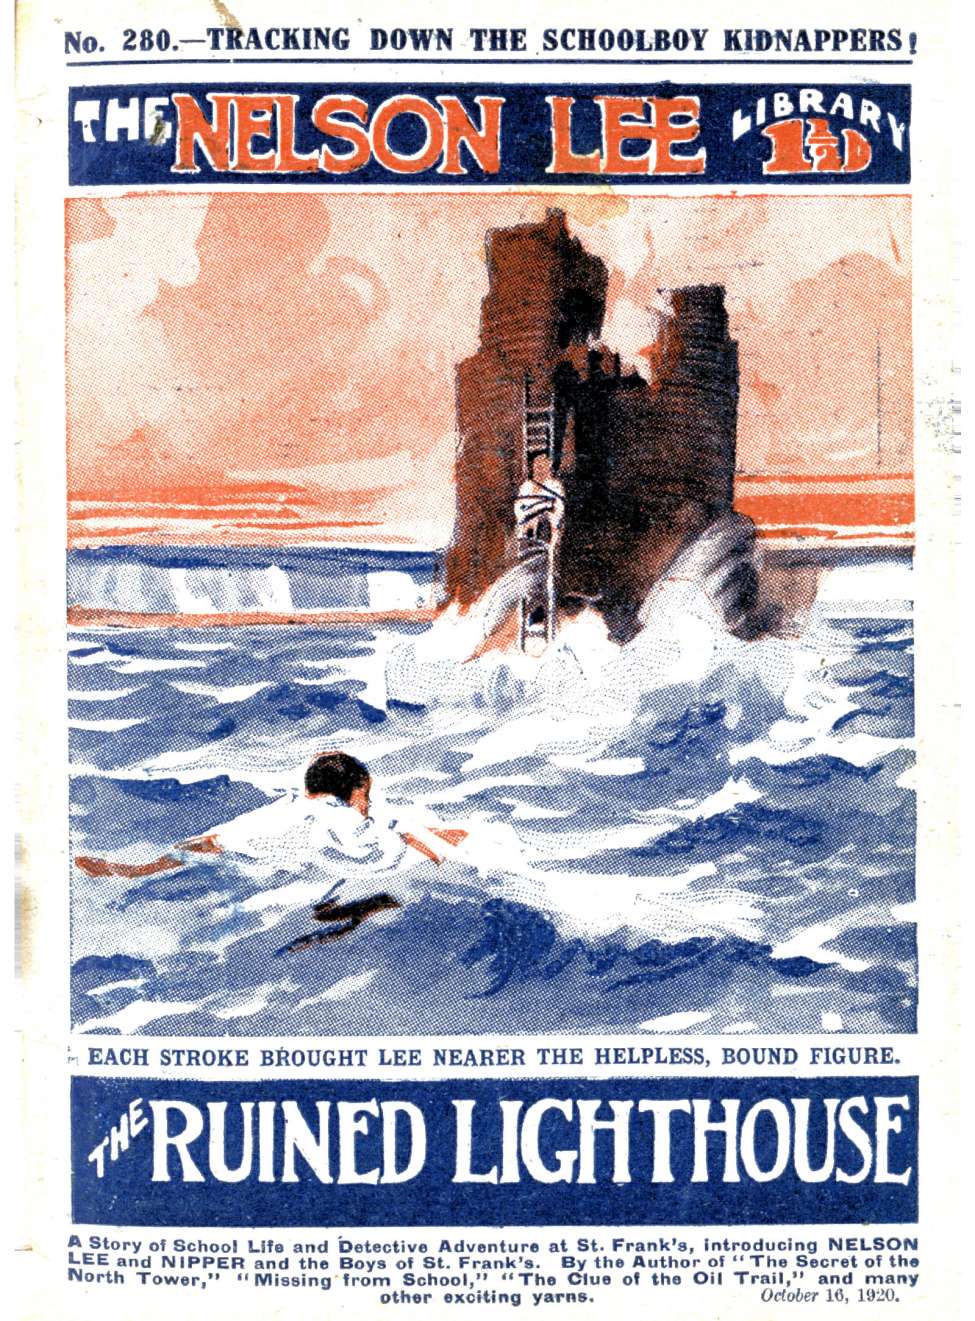 Comic Book Cover For Nelson Lee Library s1 280 - The Ruined Lighthouse